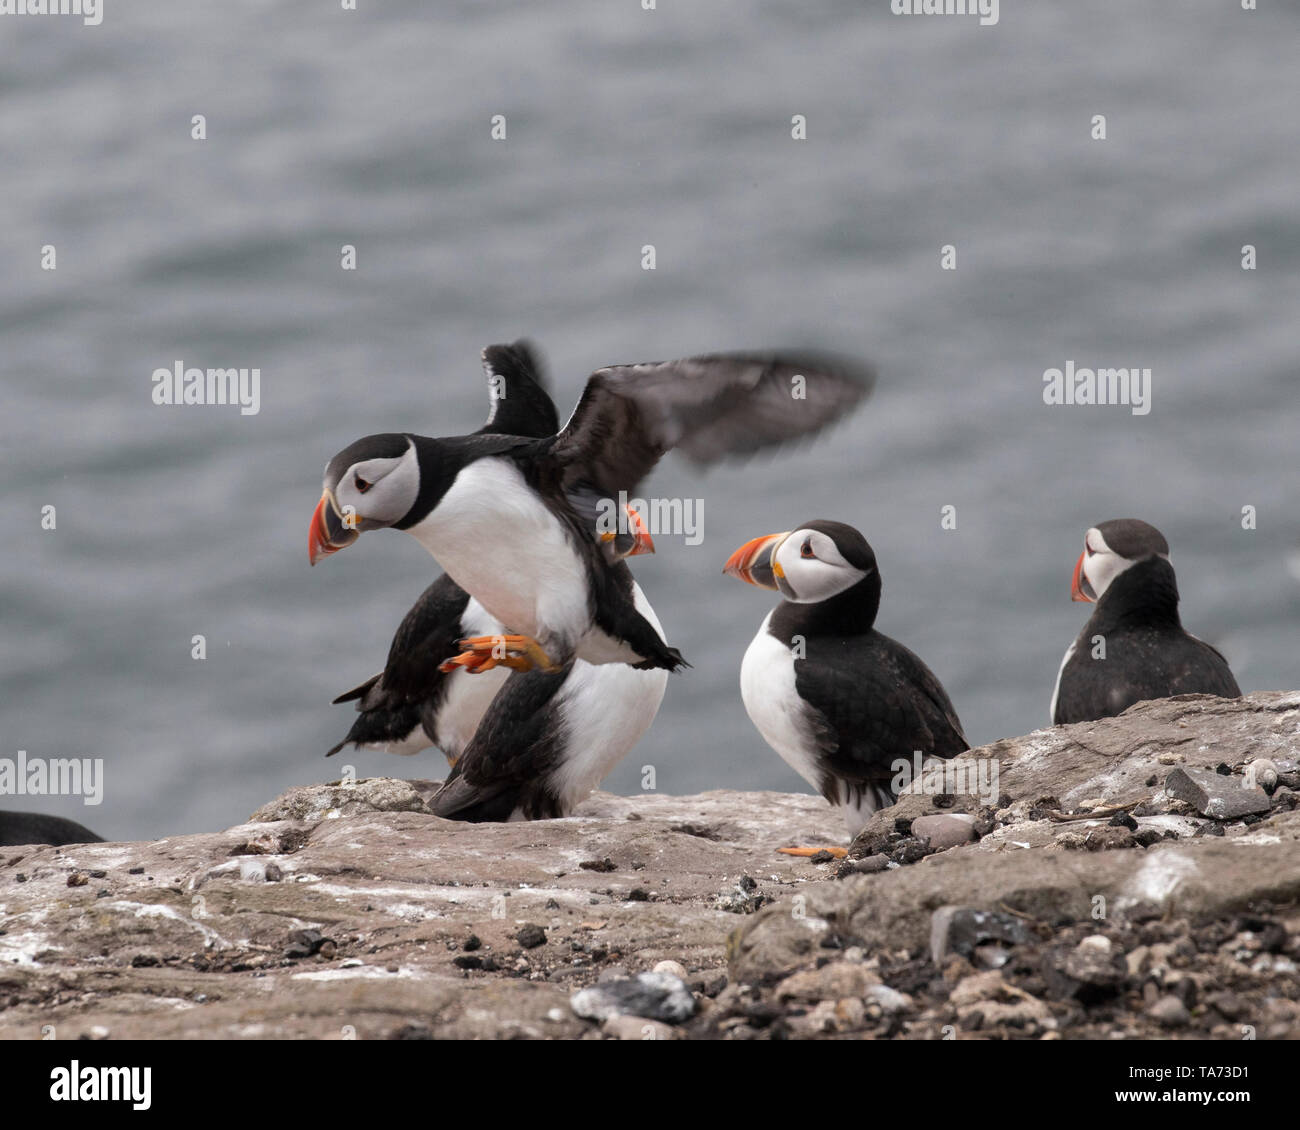 Flying puffin landing by group of puffins on stony ledge overlooking sea Stock Photo